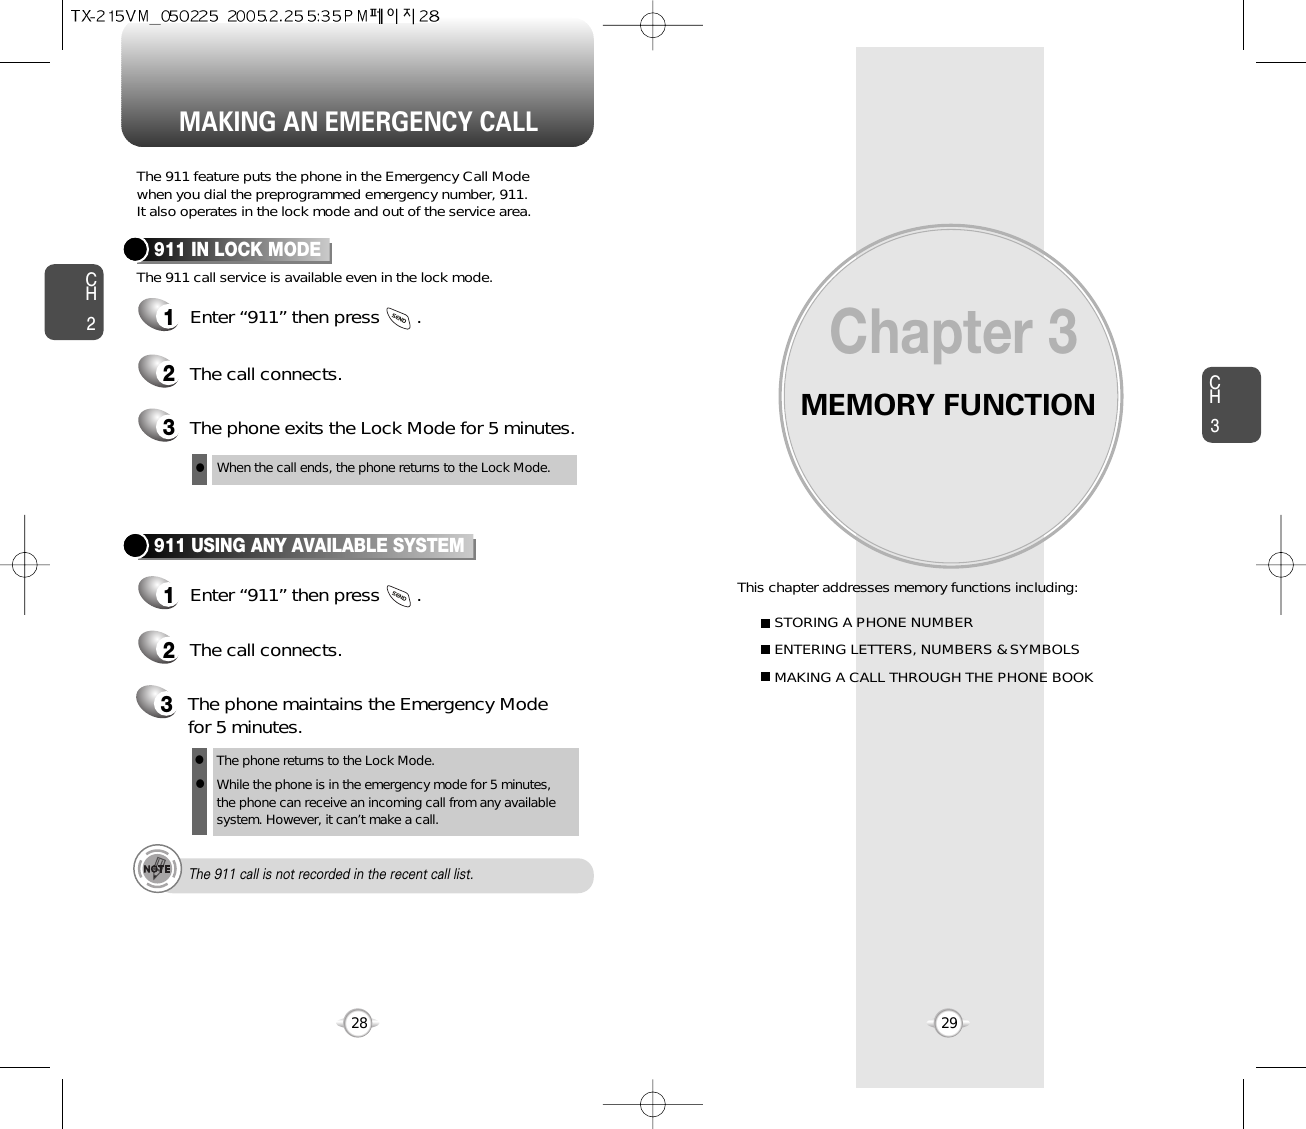 MEMORY FUNCTIONThis chapter addresses memory functions including:Chapter 3CH329MAKING AN EMERGENCY CALLCH228STORING A PHONE NUMBERENTERING LETTERS, NUMBERS &amp; SYMBOLSMAKING A CALL THROUGH THE PHONE BOOKThe 911 feature puts the phone in the Emergency Call Modewhen you dial the preprogrammed emergency number, 911. It also operates in the lock mode and out of the service area.The 911 call service is available even in the lock mode.911 IN LOCK MODE1Enter “911” then press       .When the call ends, the phone returns to the Lock Mode.2The call connects.3The phone exits the Lock Mode for 5 minutes.911 USING ANY AVAILABLE SYSTEM1Enter “911” then press       .The phone returns to the Lock Mode.While the phone is in the emergency mode for 5 minutes,the phone can receive an incoming call from any availablesystem. However, it can’t make a call.2The call connects.3The phone maintains the Emergency Modefor 5 minutes.lllThe 911 call is not recorded in the recent call list.